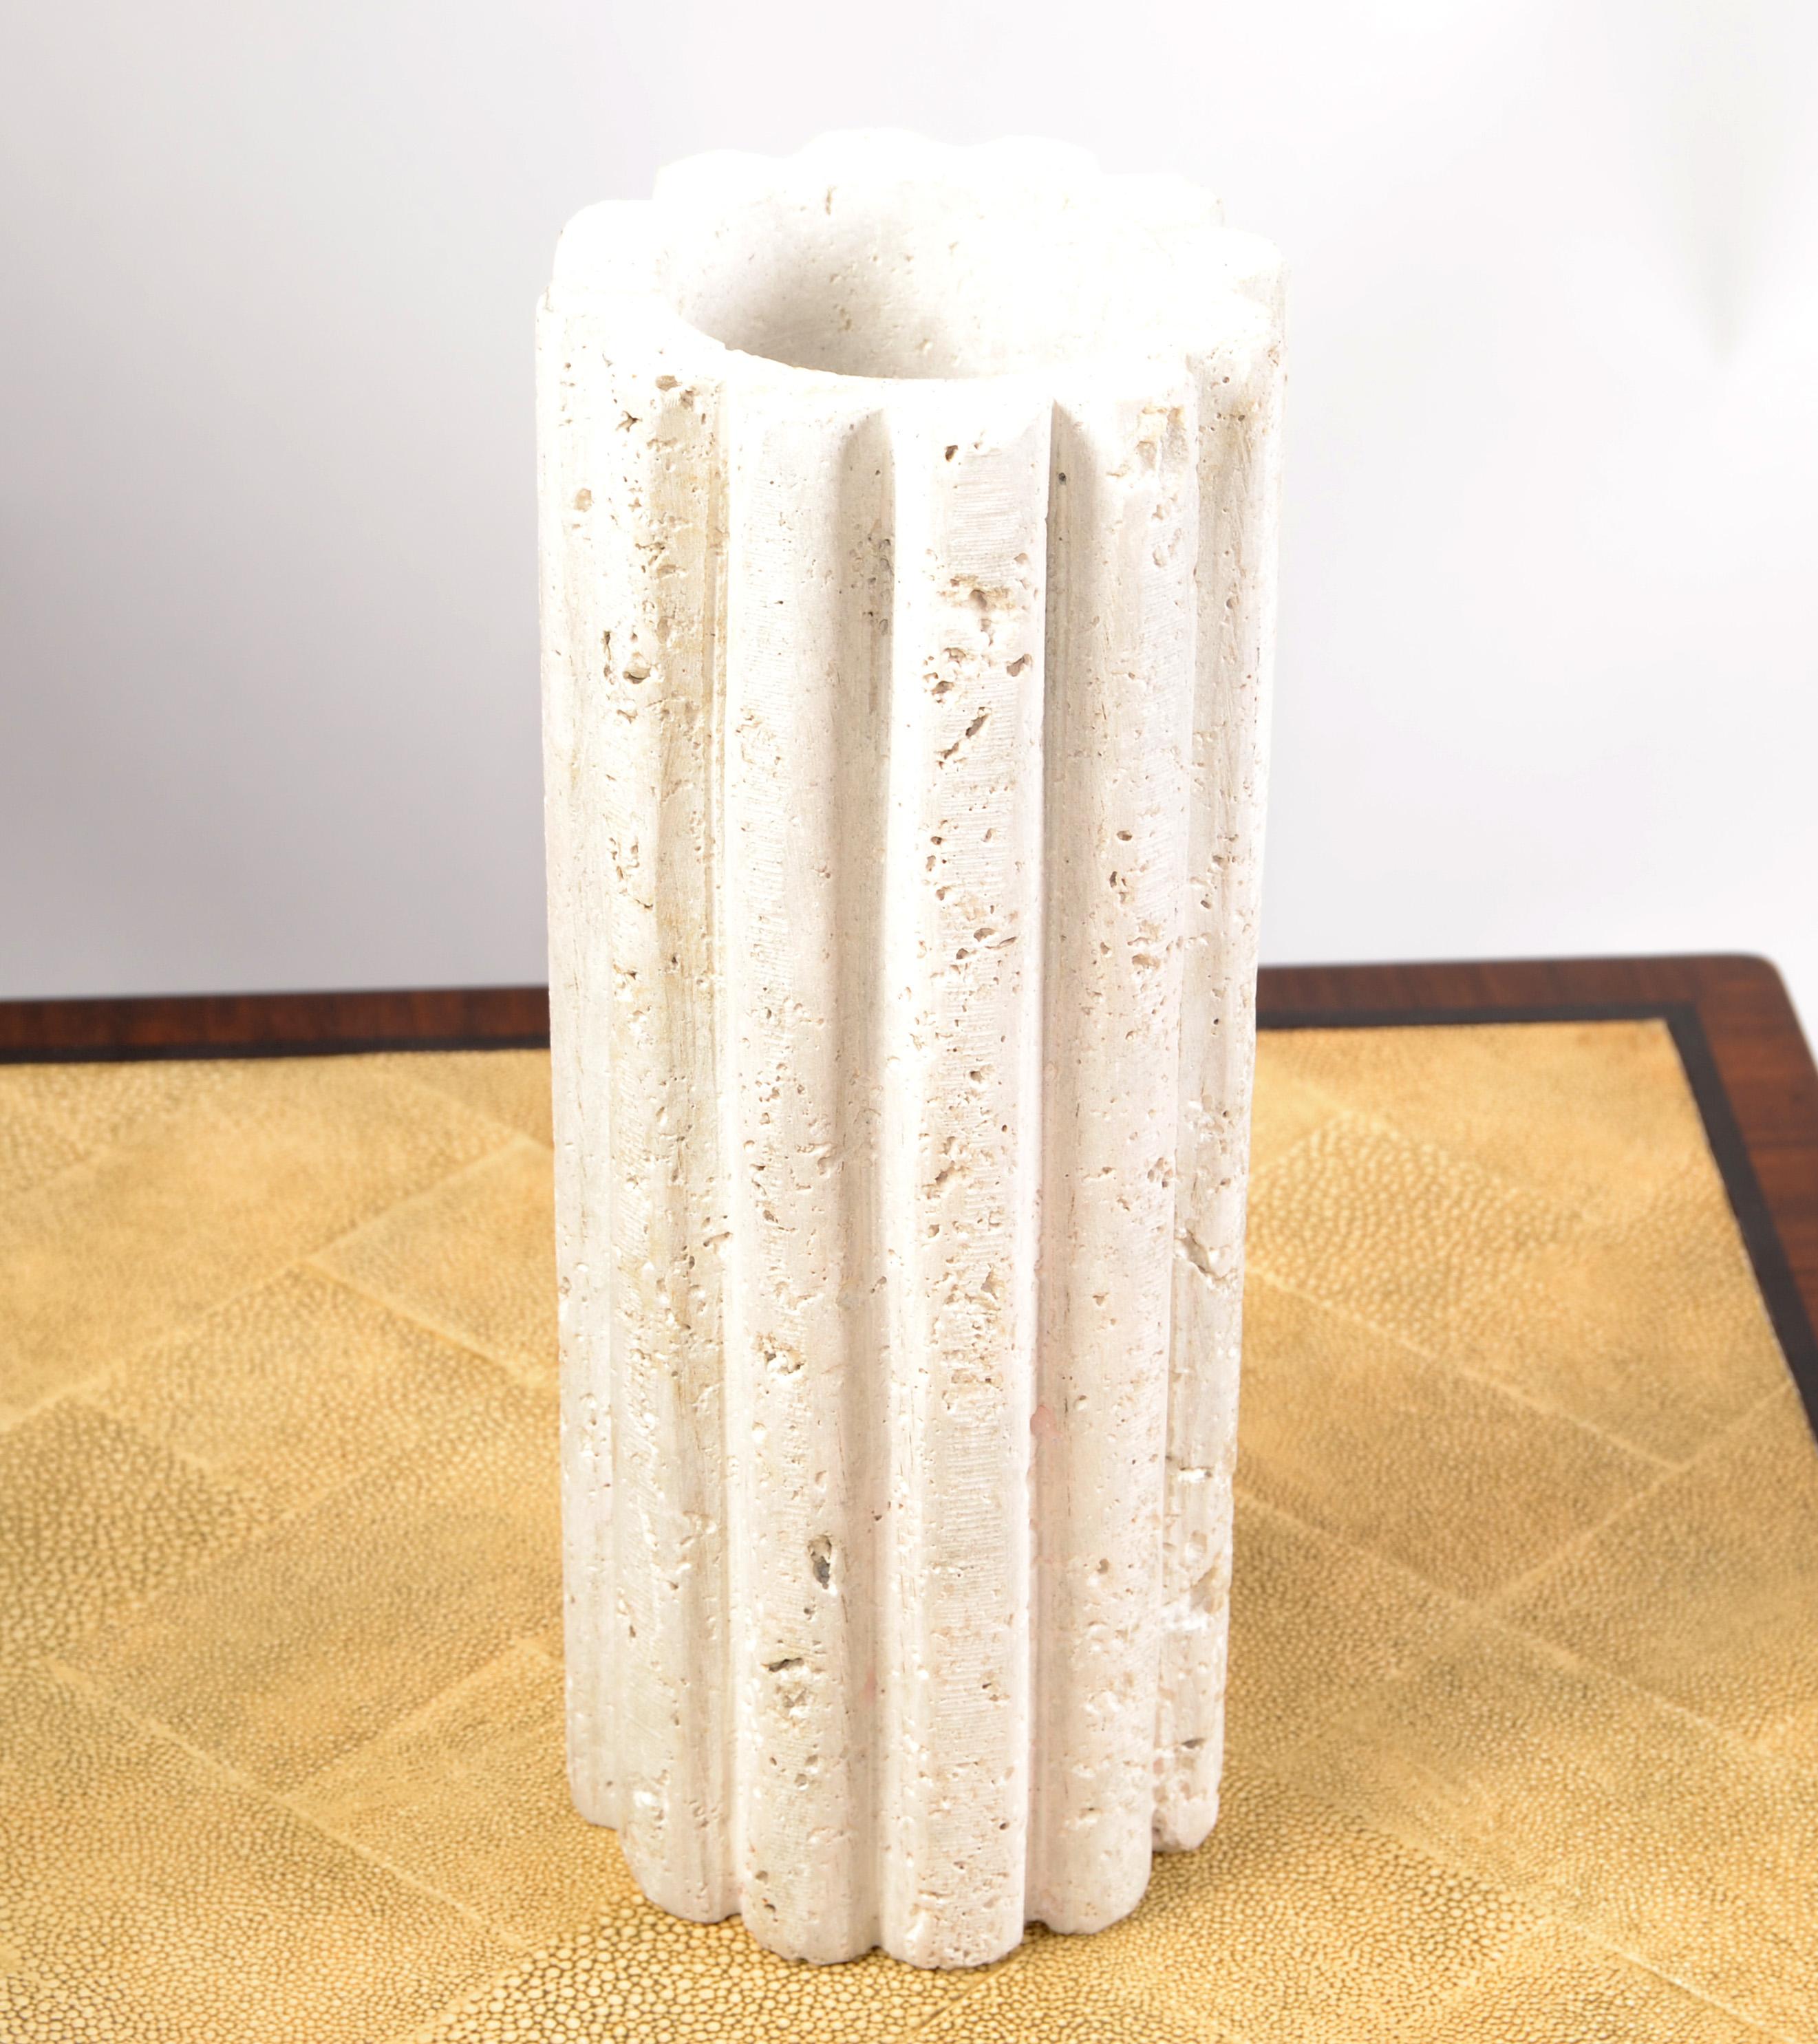 Italian solid Beige, Tan or Taupe Travertine fluted handmade Vase, Vessel in very good original condition. Post-Modern Period circa 1980's. 
Fluted or scalloped sides that create a soft edge, wrapping around the entire piece. 
Great vintage piece